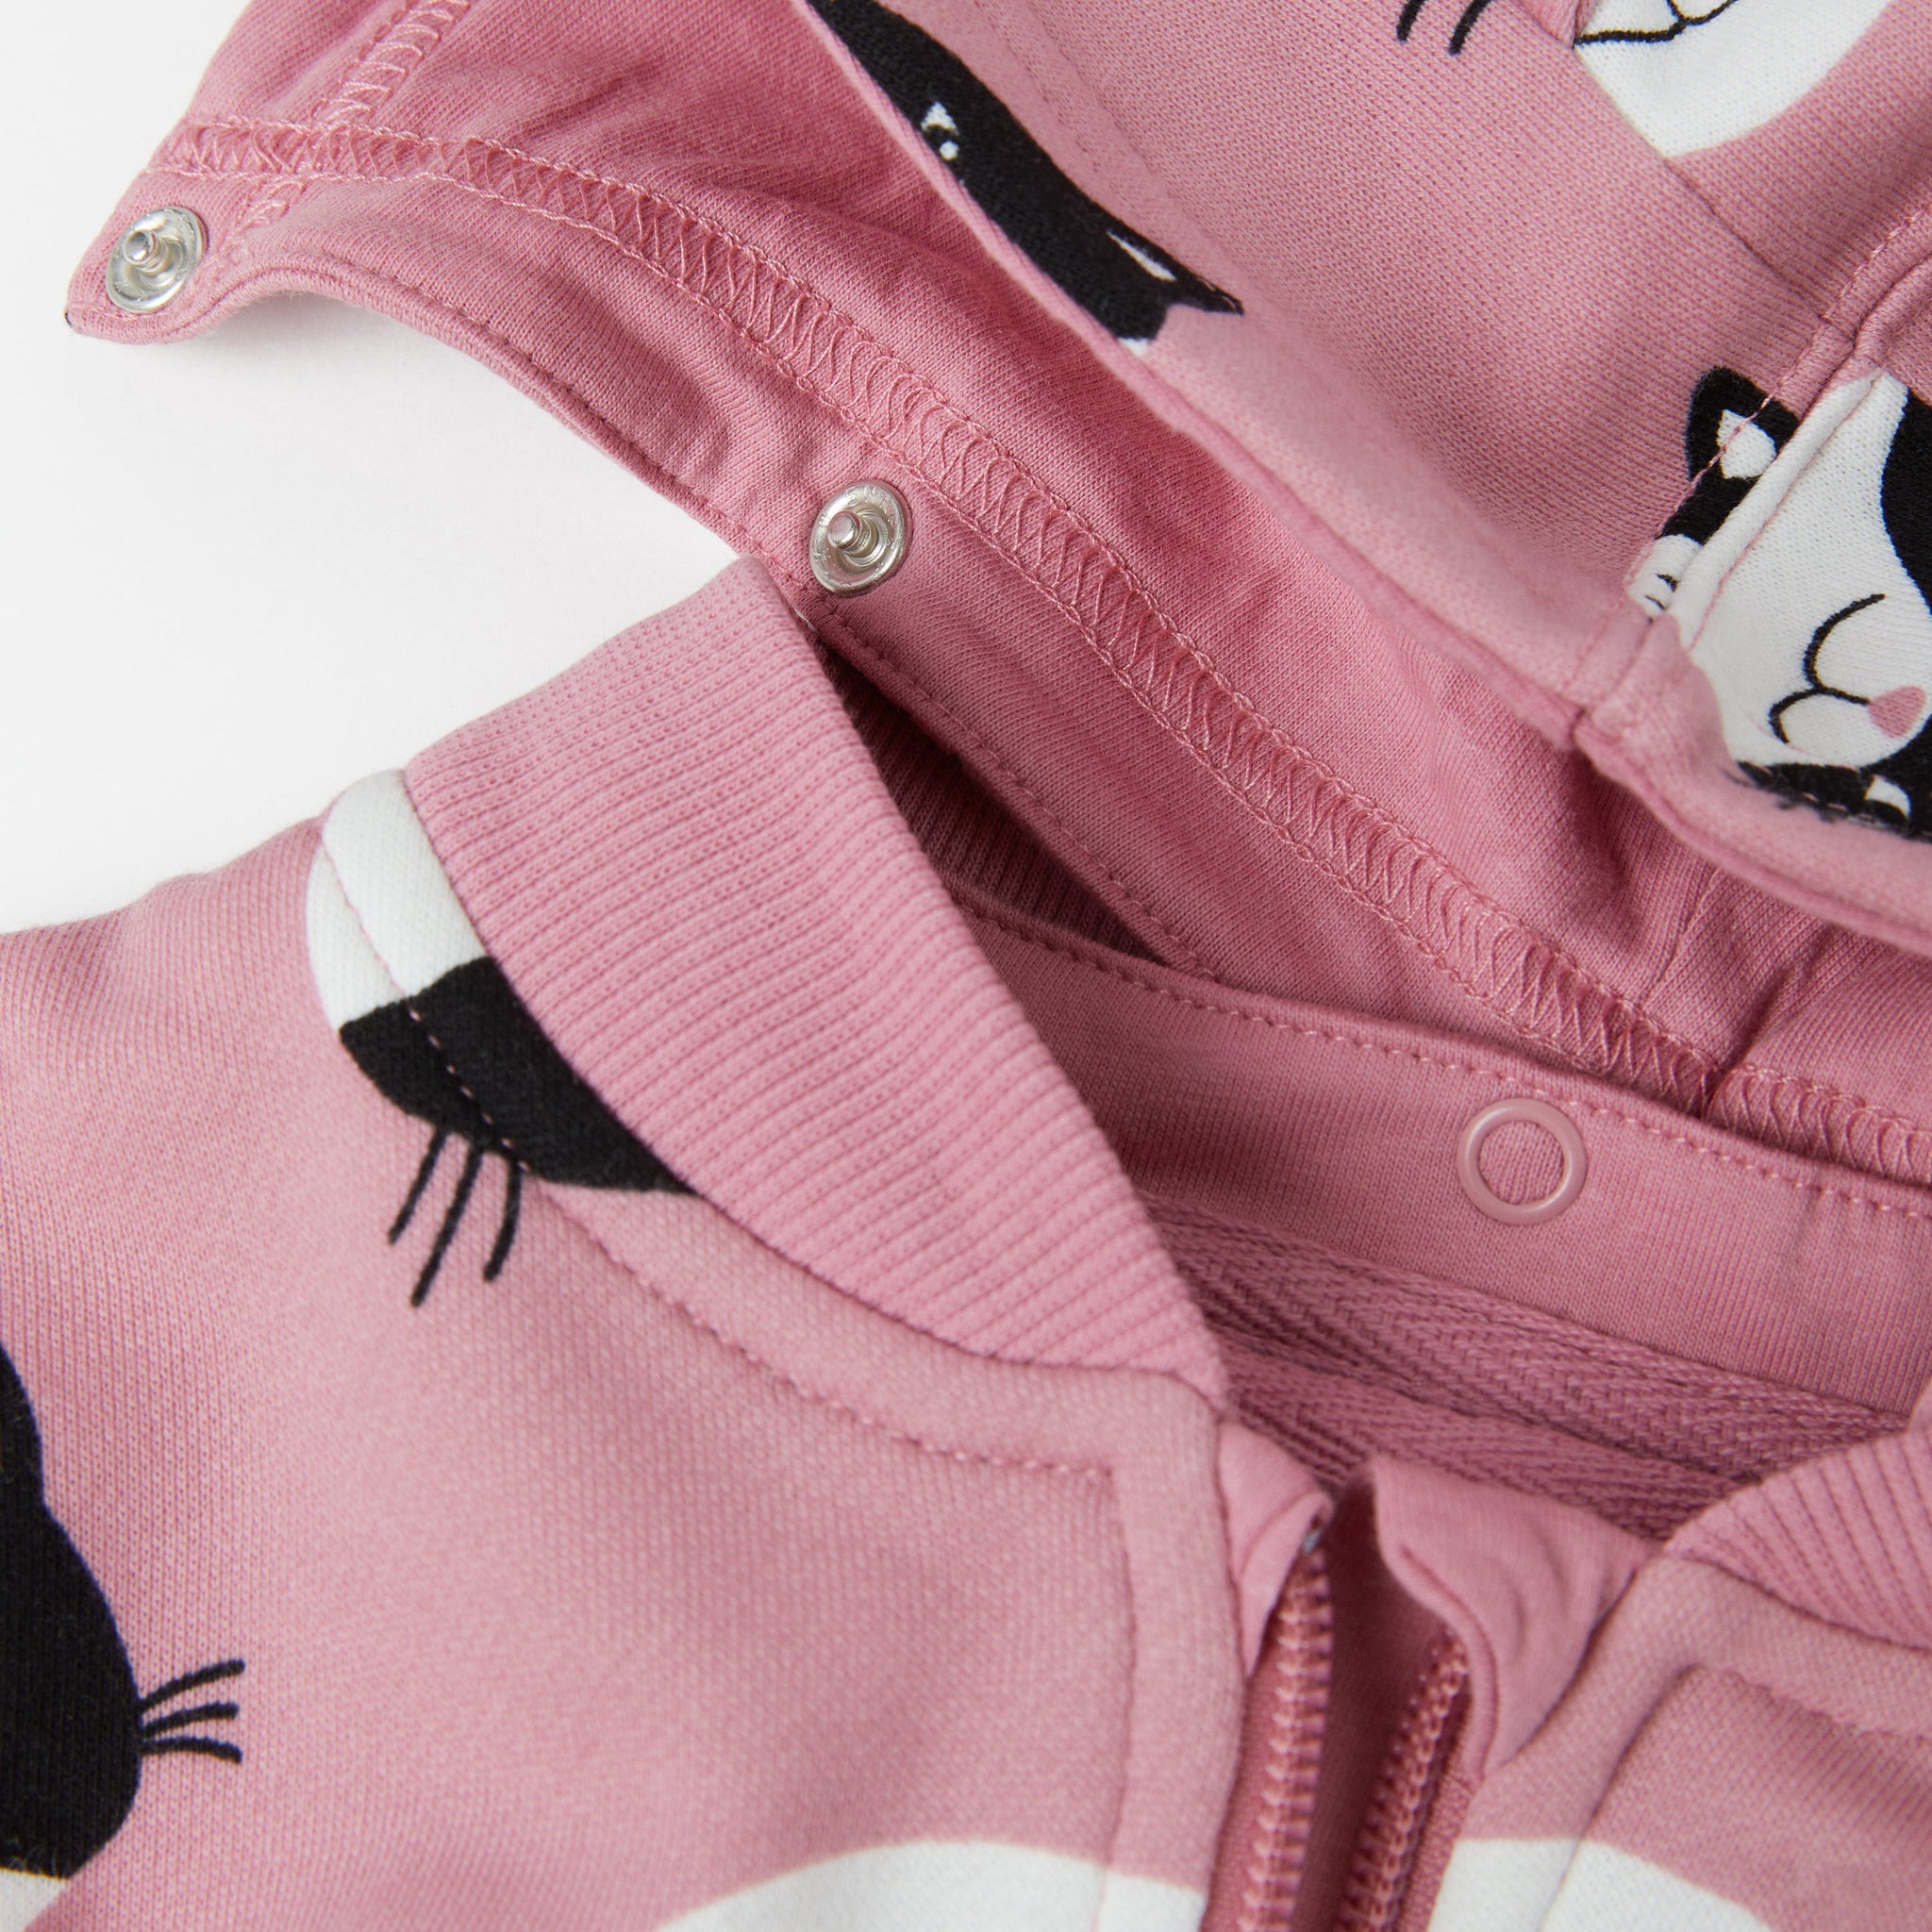 Cat Print Pink Kids Hoodie from the Polarn O. Pyret Kidswear collection. Ethically produced kids clothing.